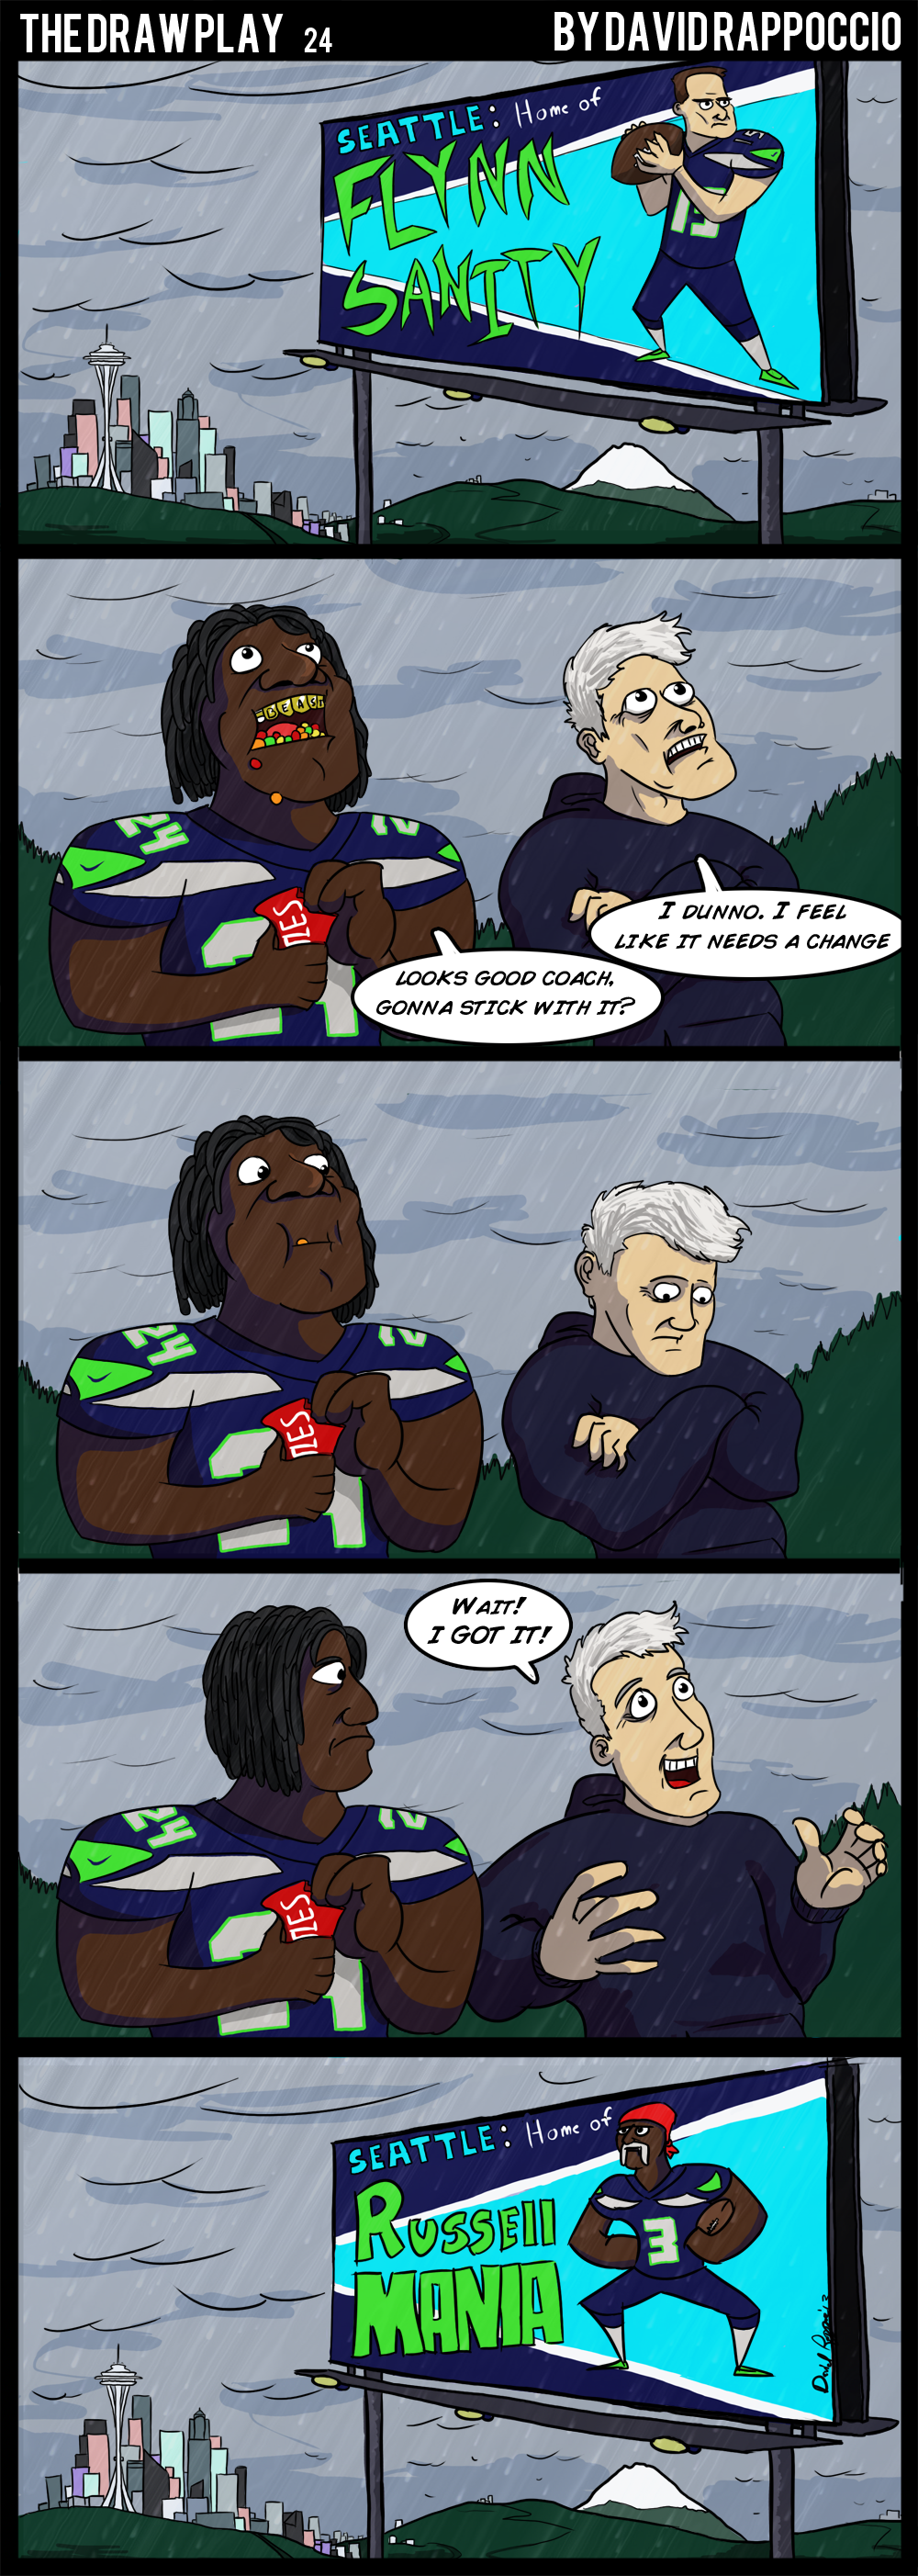 Every mention of the seahawks must include Marshawn Lynch eating Skittles